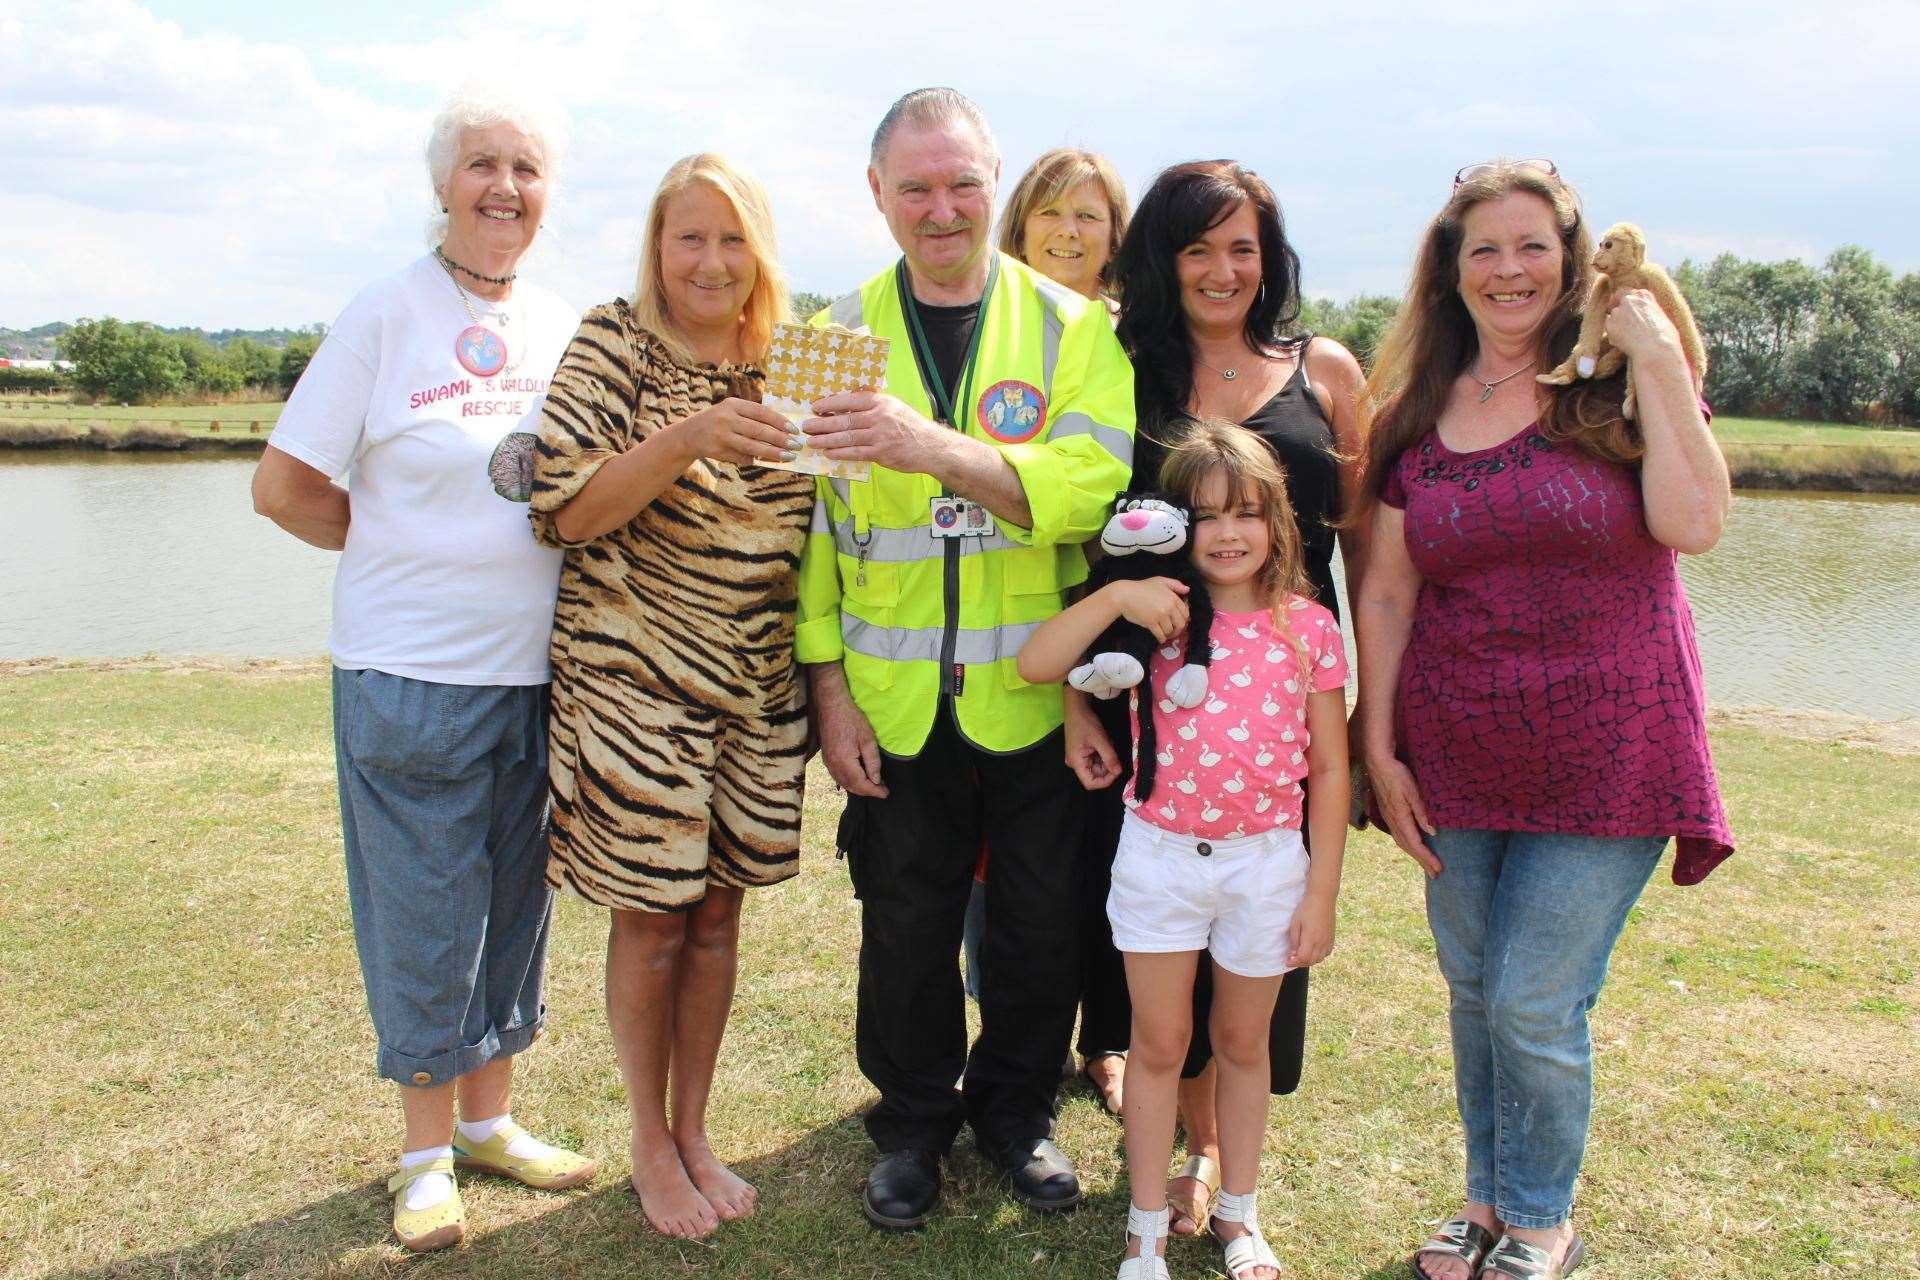 Ray Allibone of Swampy Wildlife Rescue receives a donation from Mandy Bower of the Asda night team, Sittingbourne, after rescuing an attacked swan at Barton's Point, Sheerness. Also in the picture are Patricia Lassnig, Adele Stearns, her daughter Lola, and Lyn Burr (14785355)